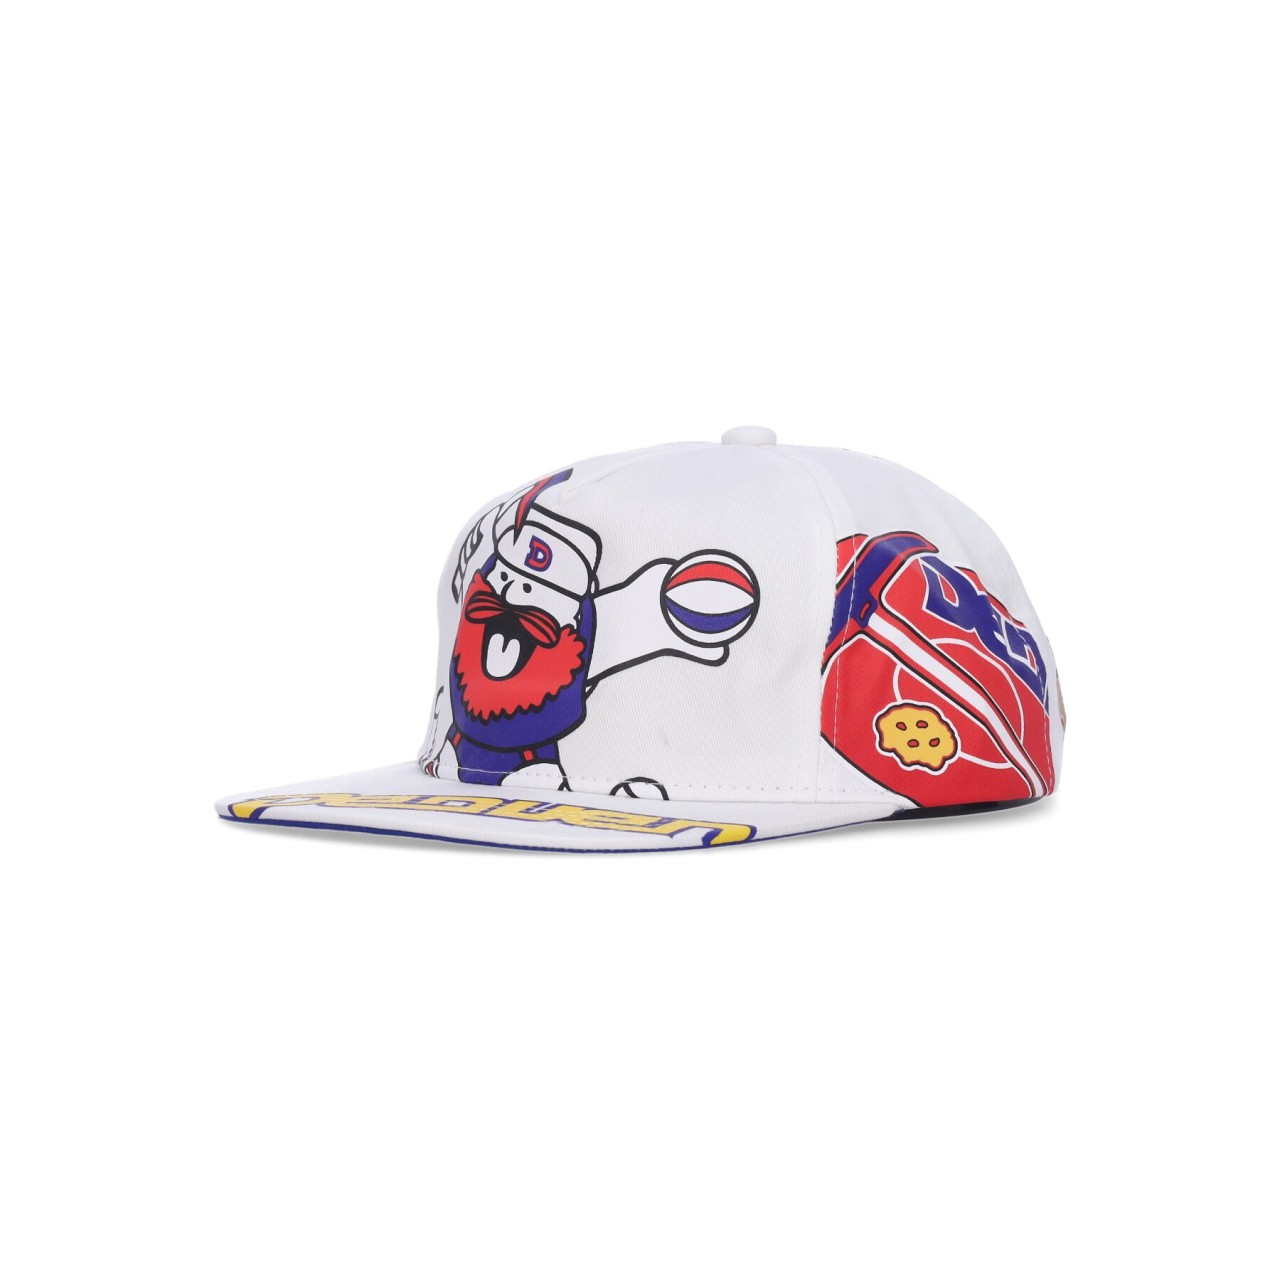 MITCHELL & NESS NBA IN YOUR FACE DEADSTOCK HWC DENNUG HMUS5600-DNUYYPPPWHIT